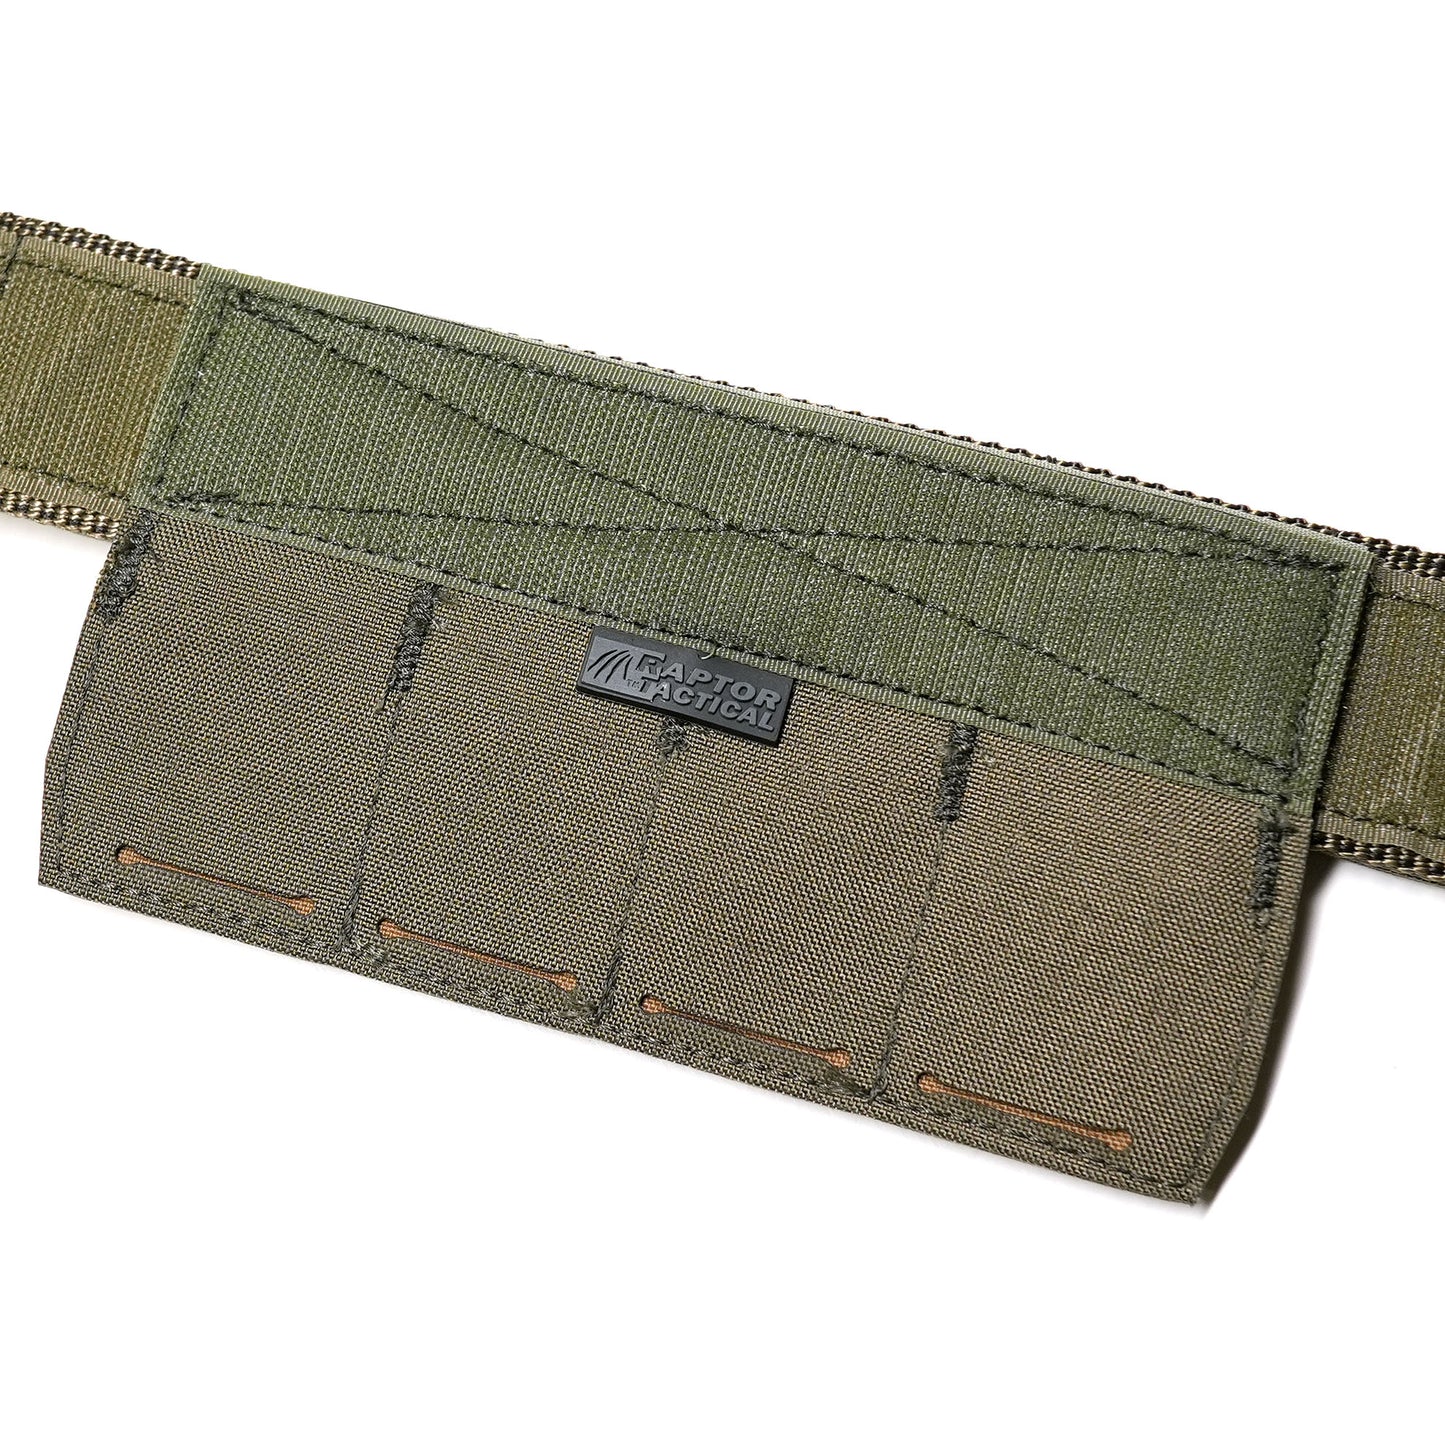 Raptor Tactical MOLLE EXTENSION 2 ROW PLUS PANELS